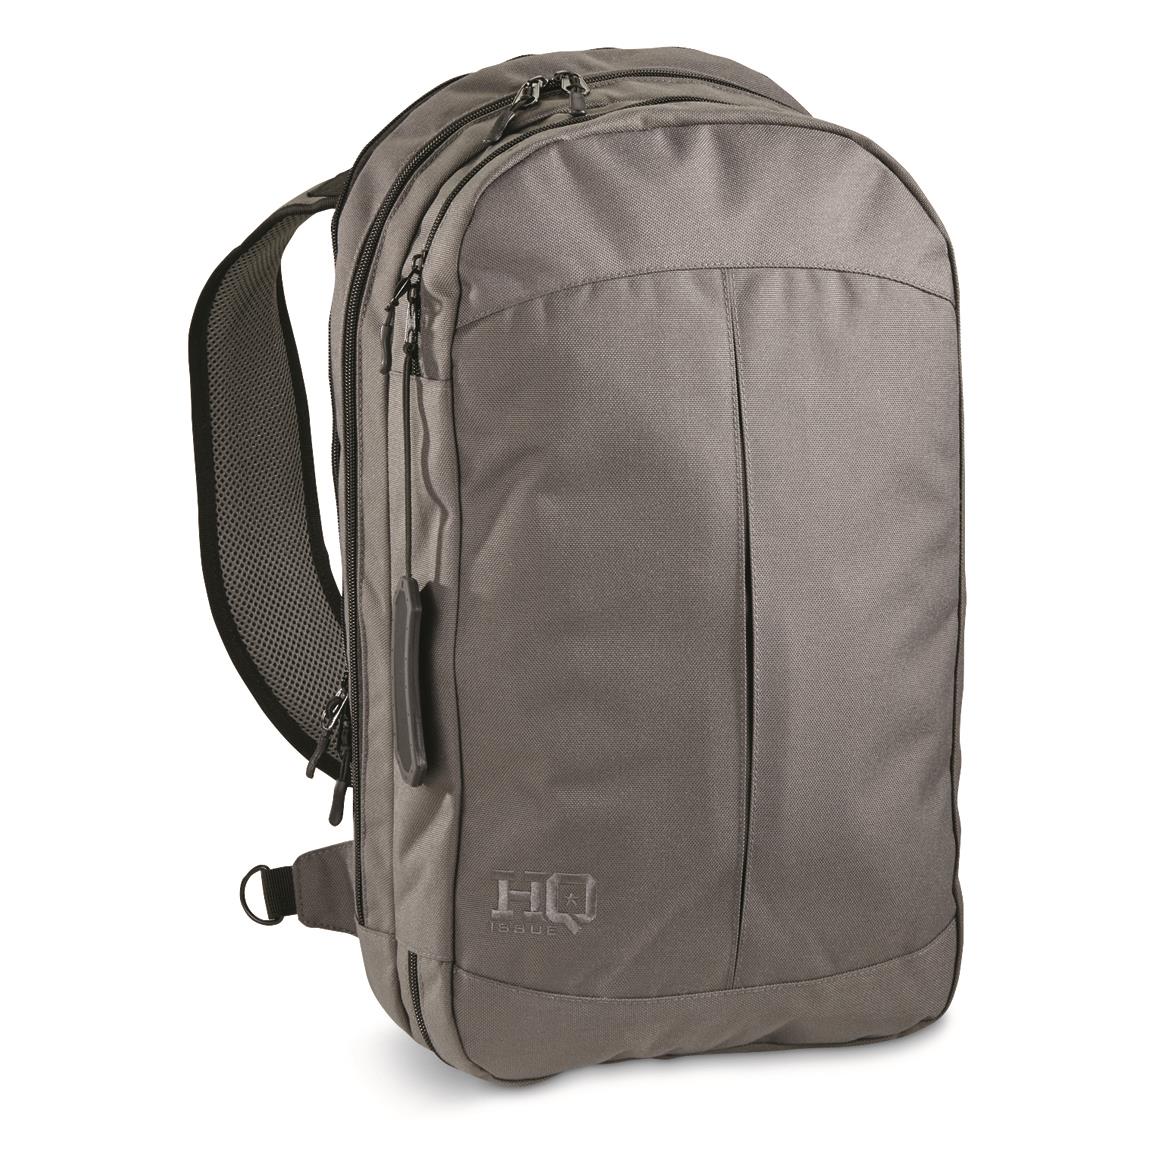 HQ ISSUE Concealed Carry Sling Pack with Armor Pocket, Gray